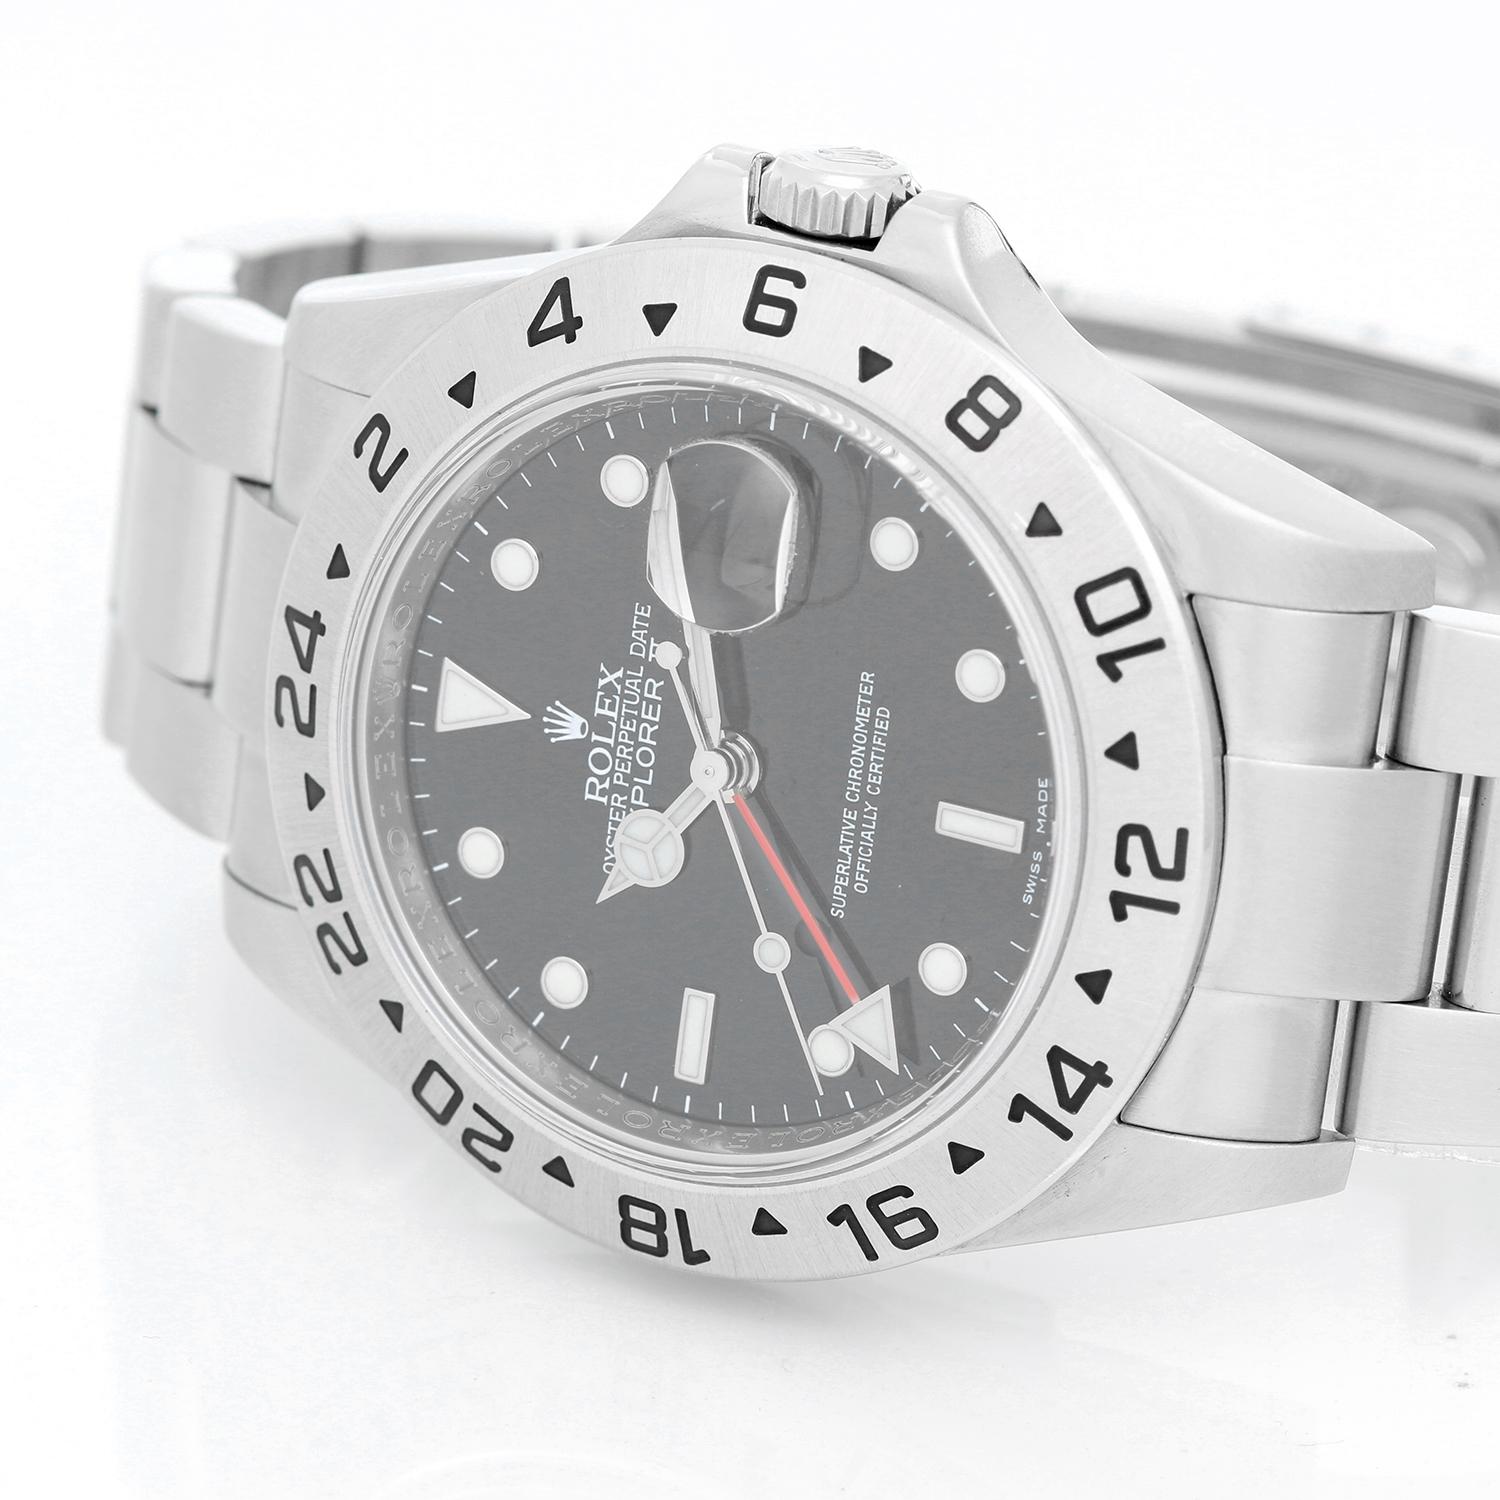 Rolex Explorer II Stainless Steel Men's Sport Watch 16570 - Automatic winding, 31 jewels, Quickset, sapphire crystal. Stainless steel case (40mm diameter). Black dial with luminous markers. Stainless steel Oyster bracelet with flip-lock clasp.